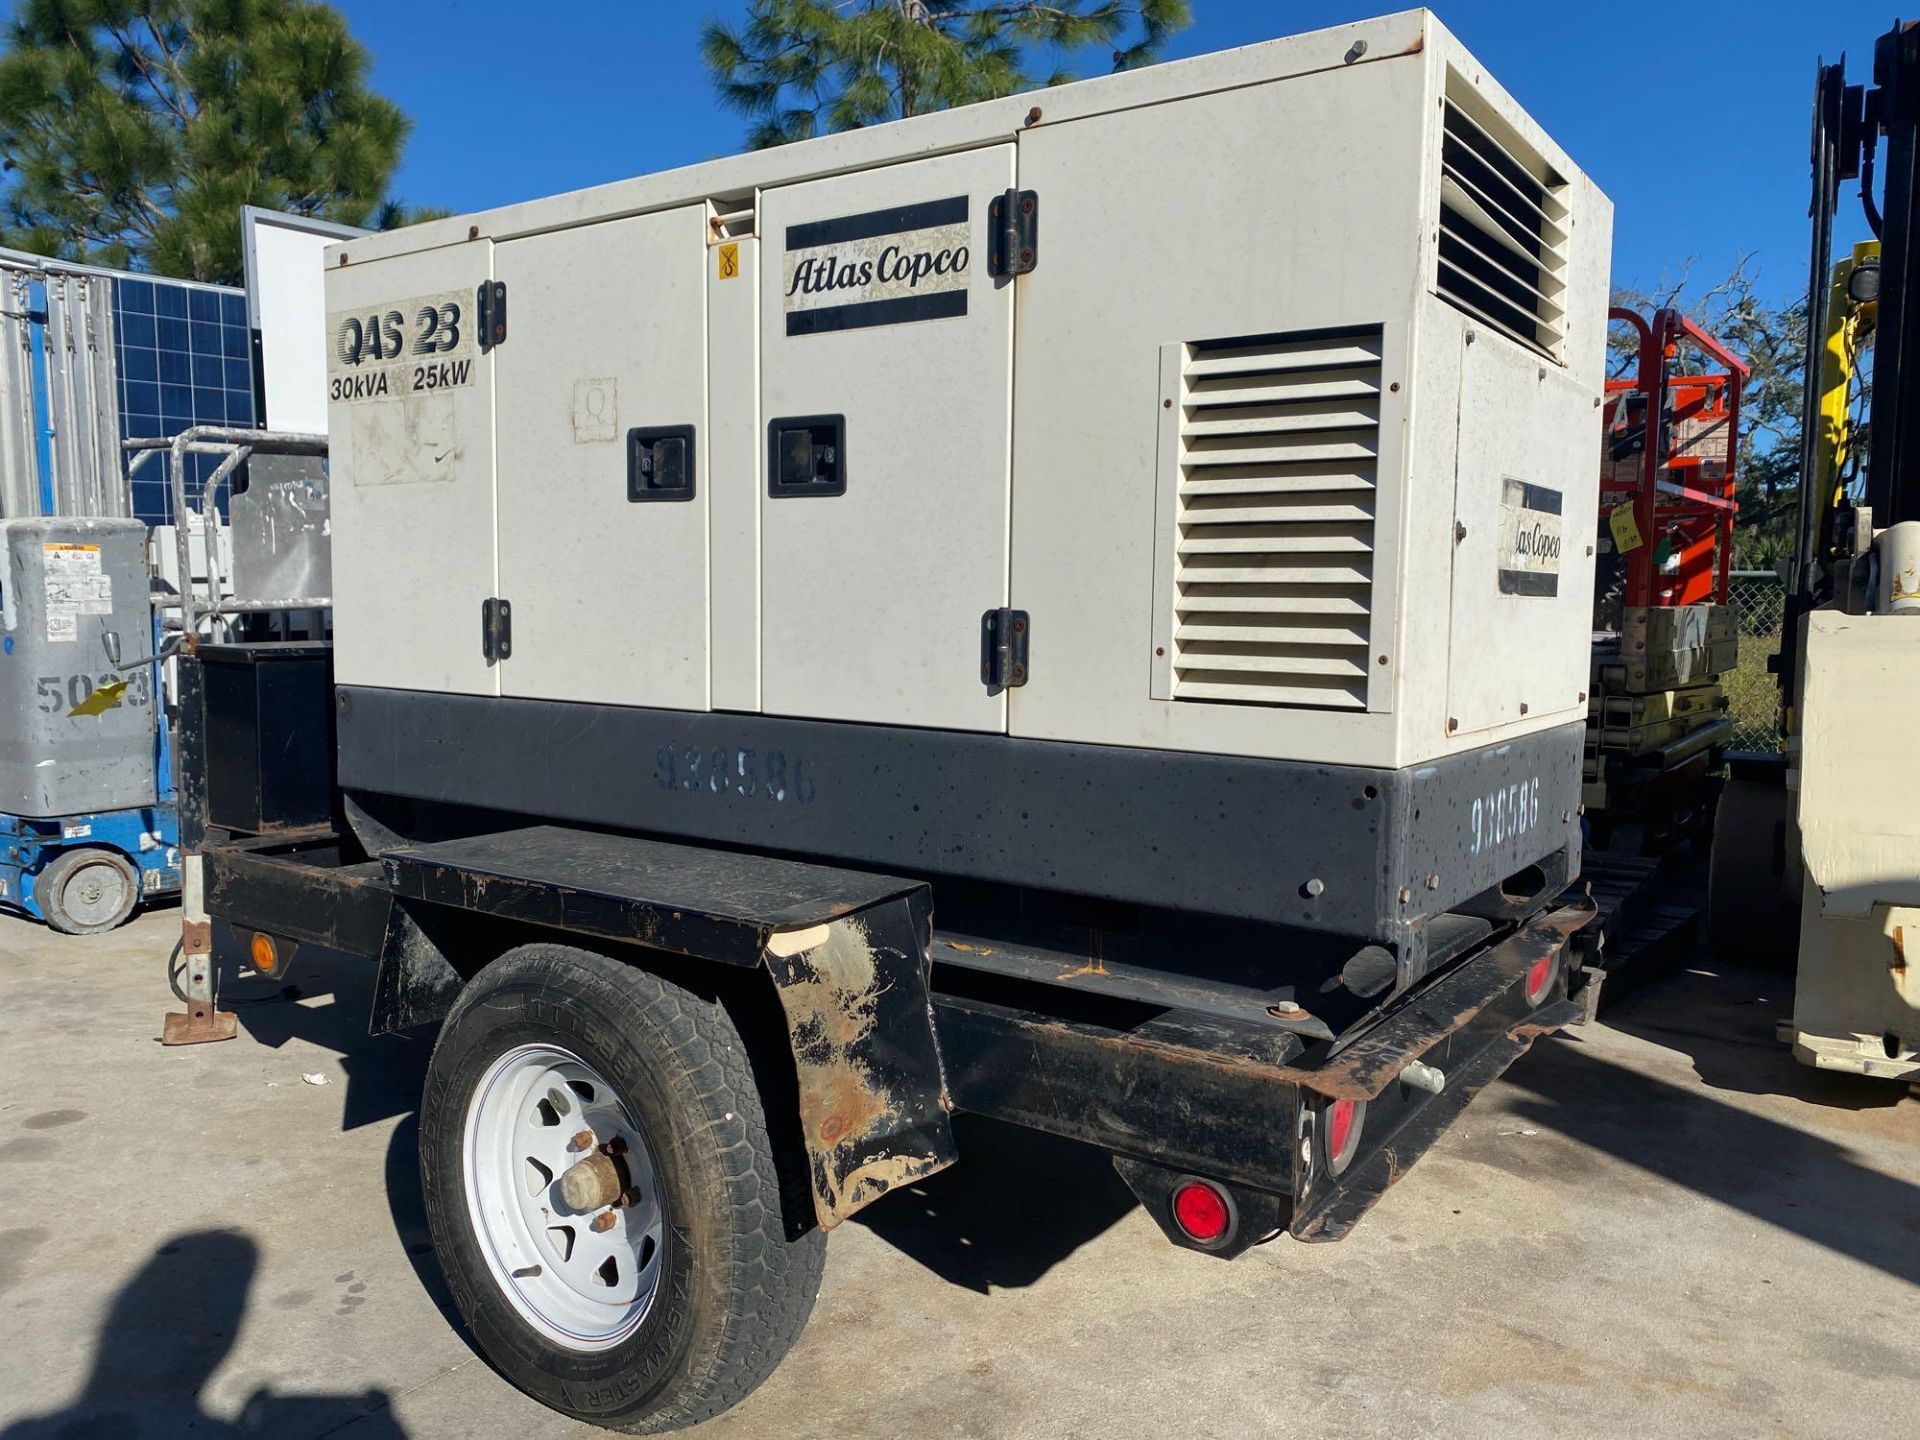 ATLAS COPCO G50 GENERATOR YANMAR DIESEL, TRAILER MOUNTED, 2041 HOURS SHOWING, RUNS AND OPERATES - Image 2 of 8